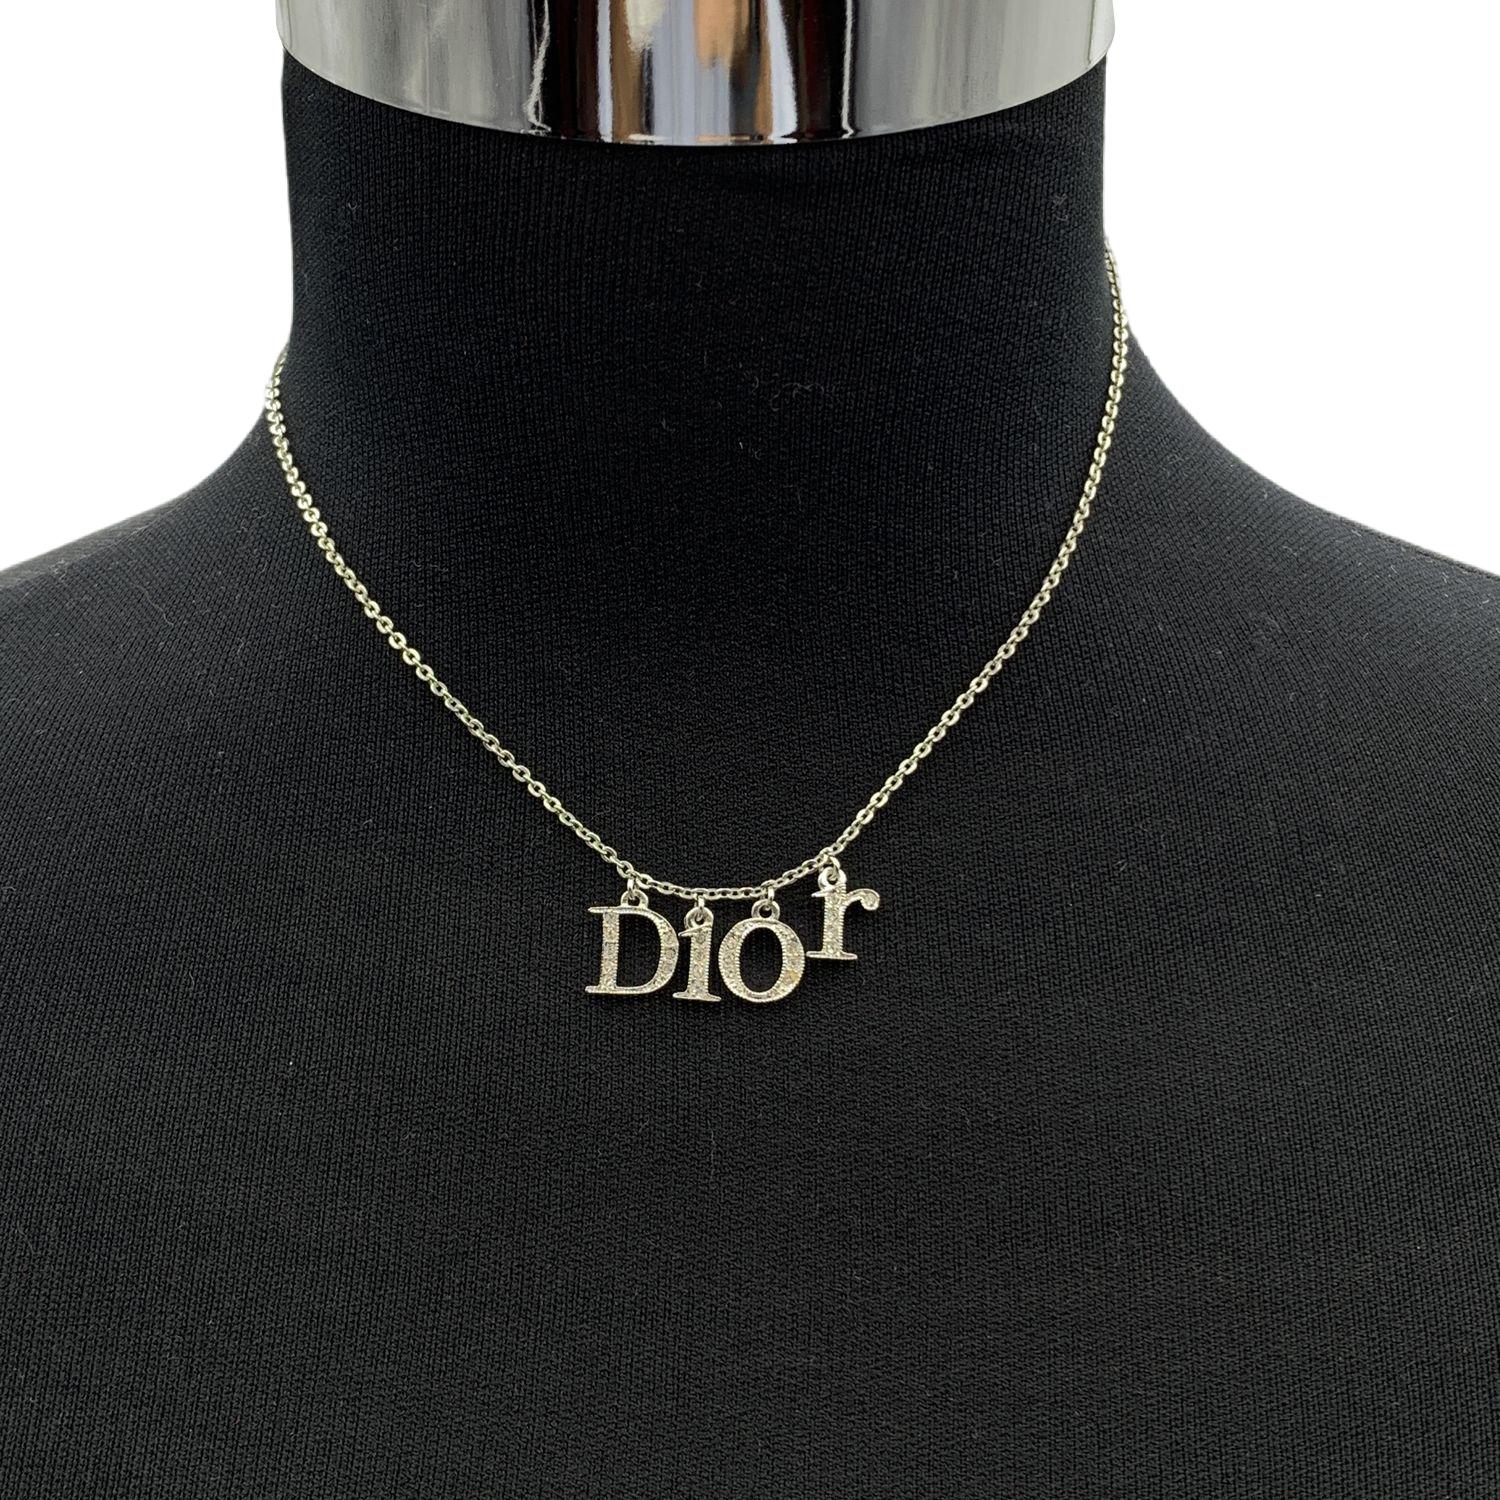 Vintage Christian Dior silver metal chain necklace with D.i.o.r charms. Lobster closure. Adjustable length. Can also be used as a bracelet. Chain length: about 14 inches - 37 cm.

Condition

A - EXCELLENT

Gently used. Please, look carefully at the